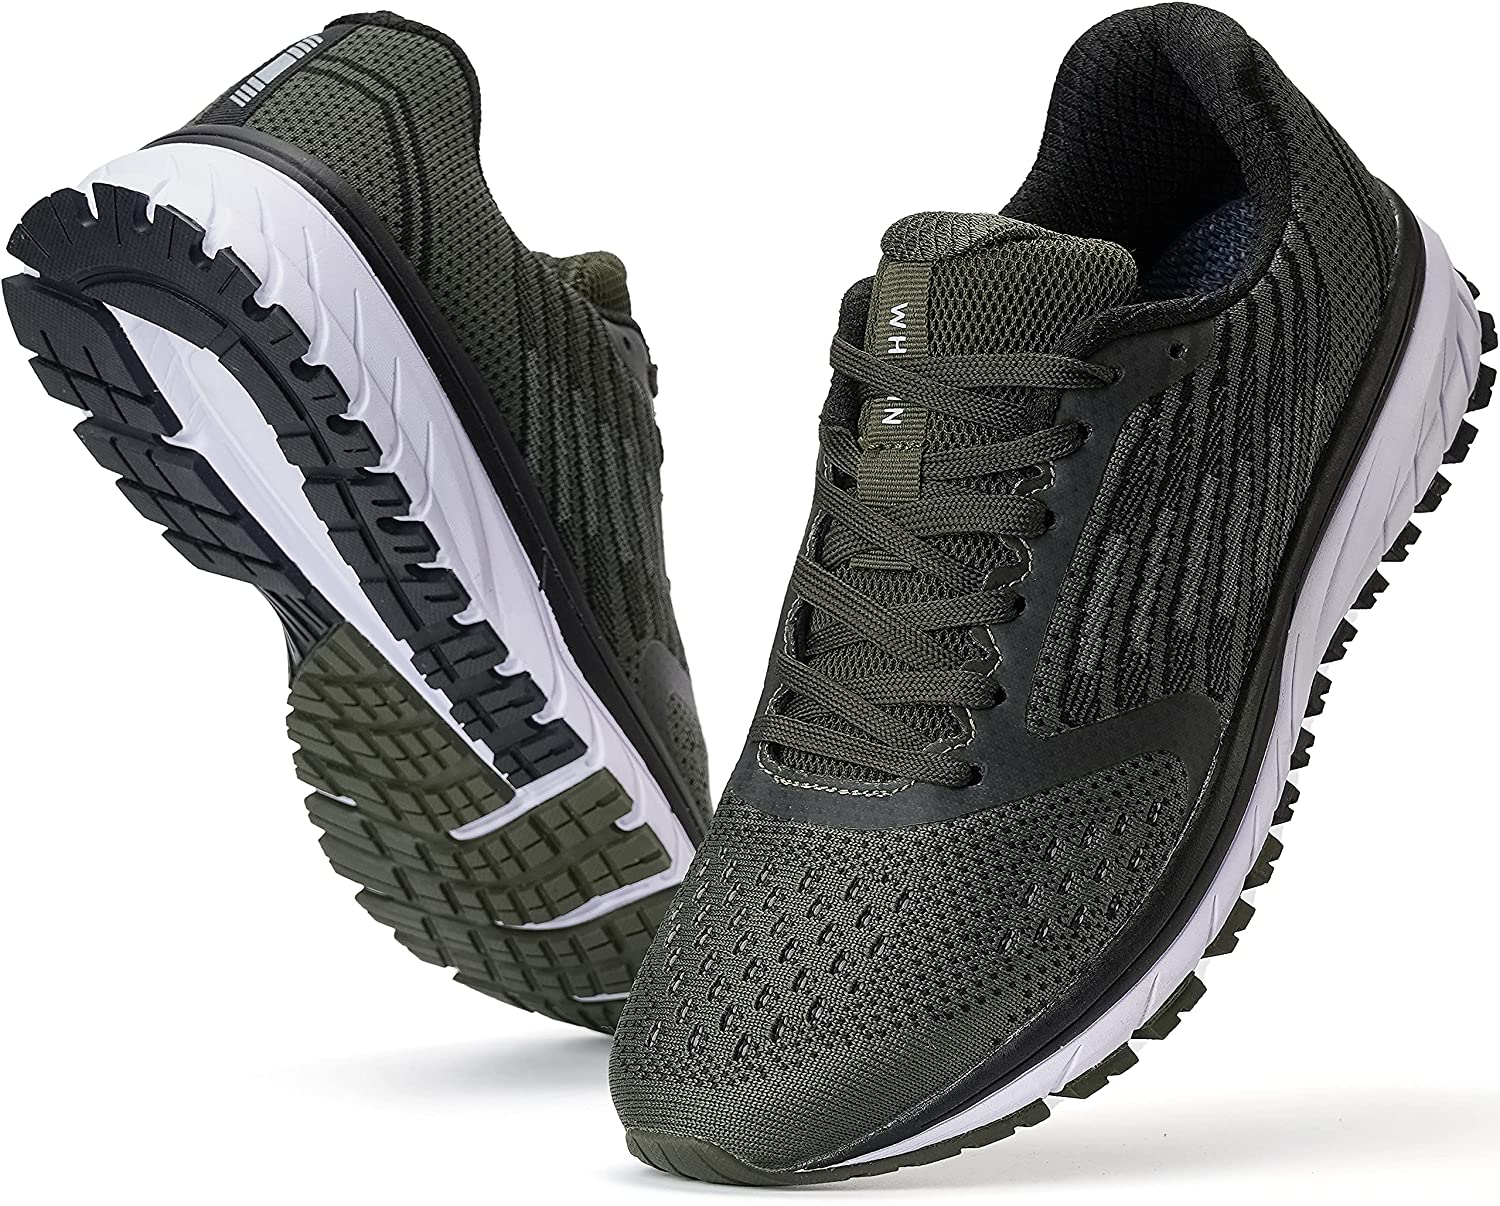 Joomra Mens Supportive Running Shoes Cushioned Lightweight Athletic Sneakers